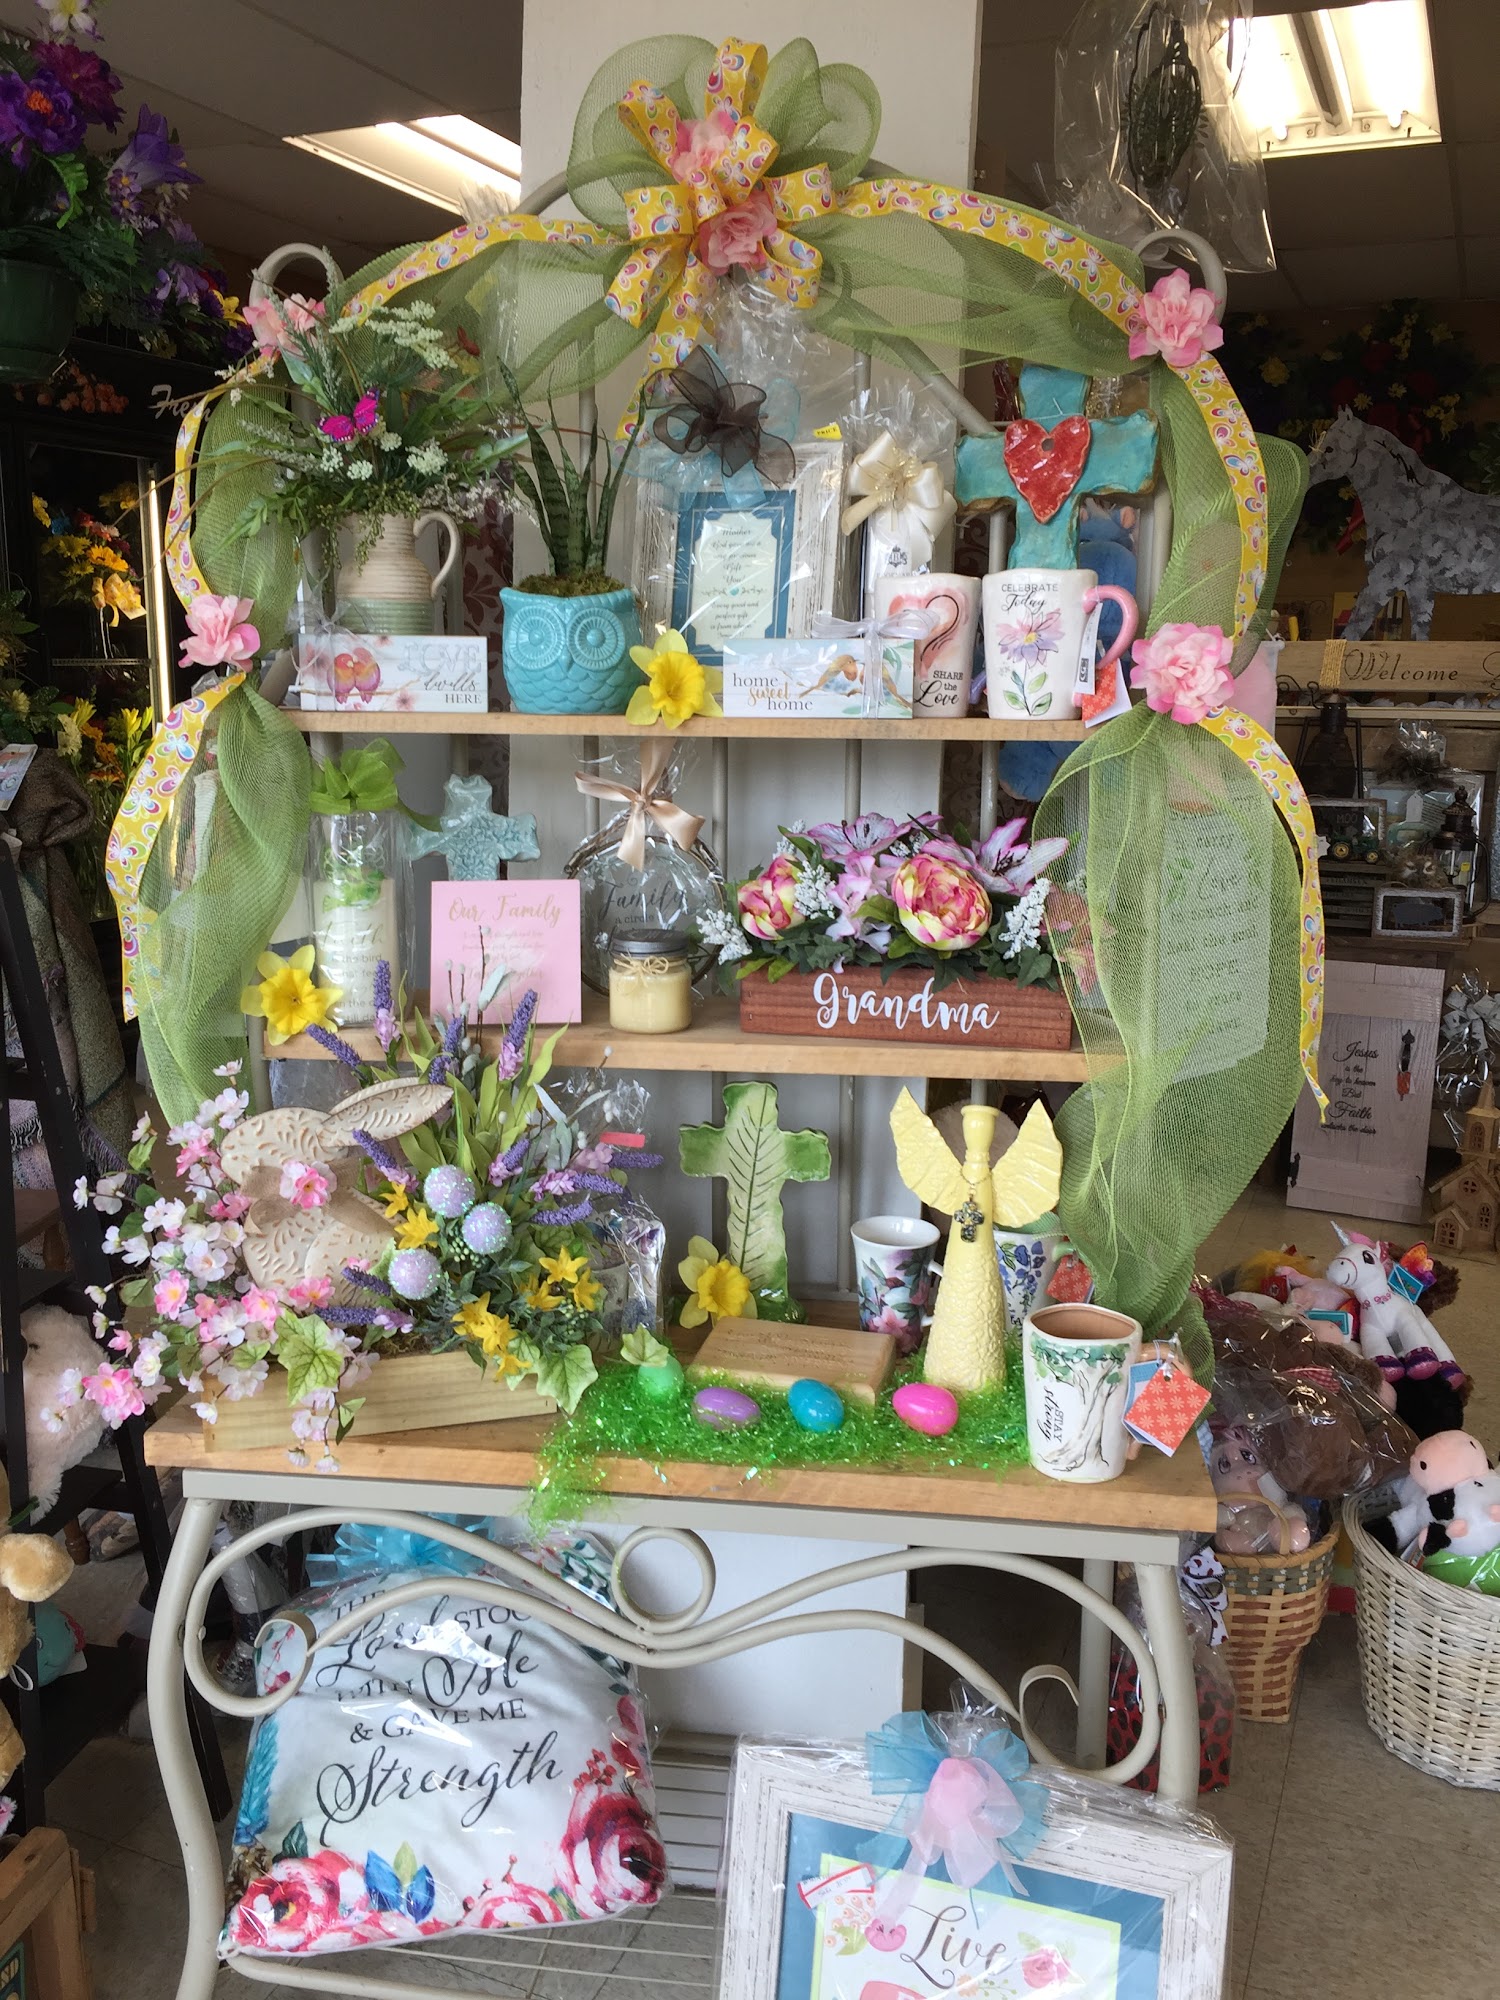 Henderson Florist and Gift Shop 669 E Main St, Henderson Tennessee 38340